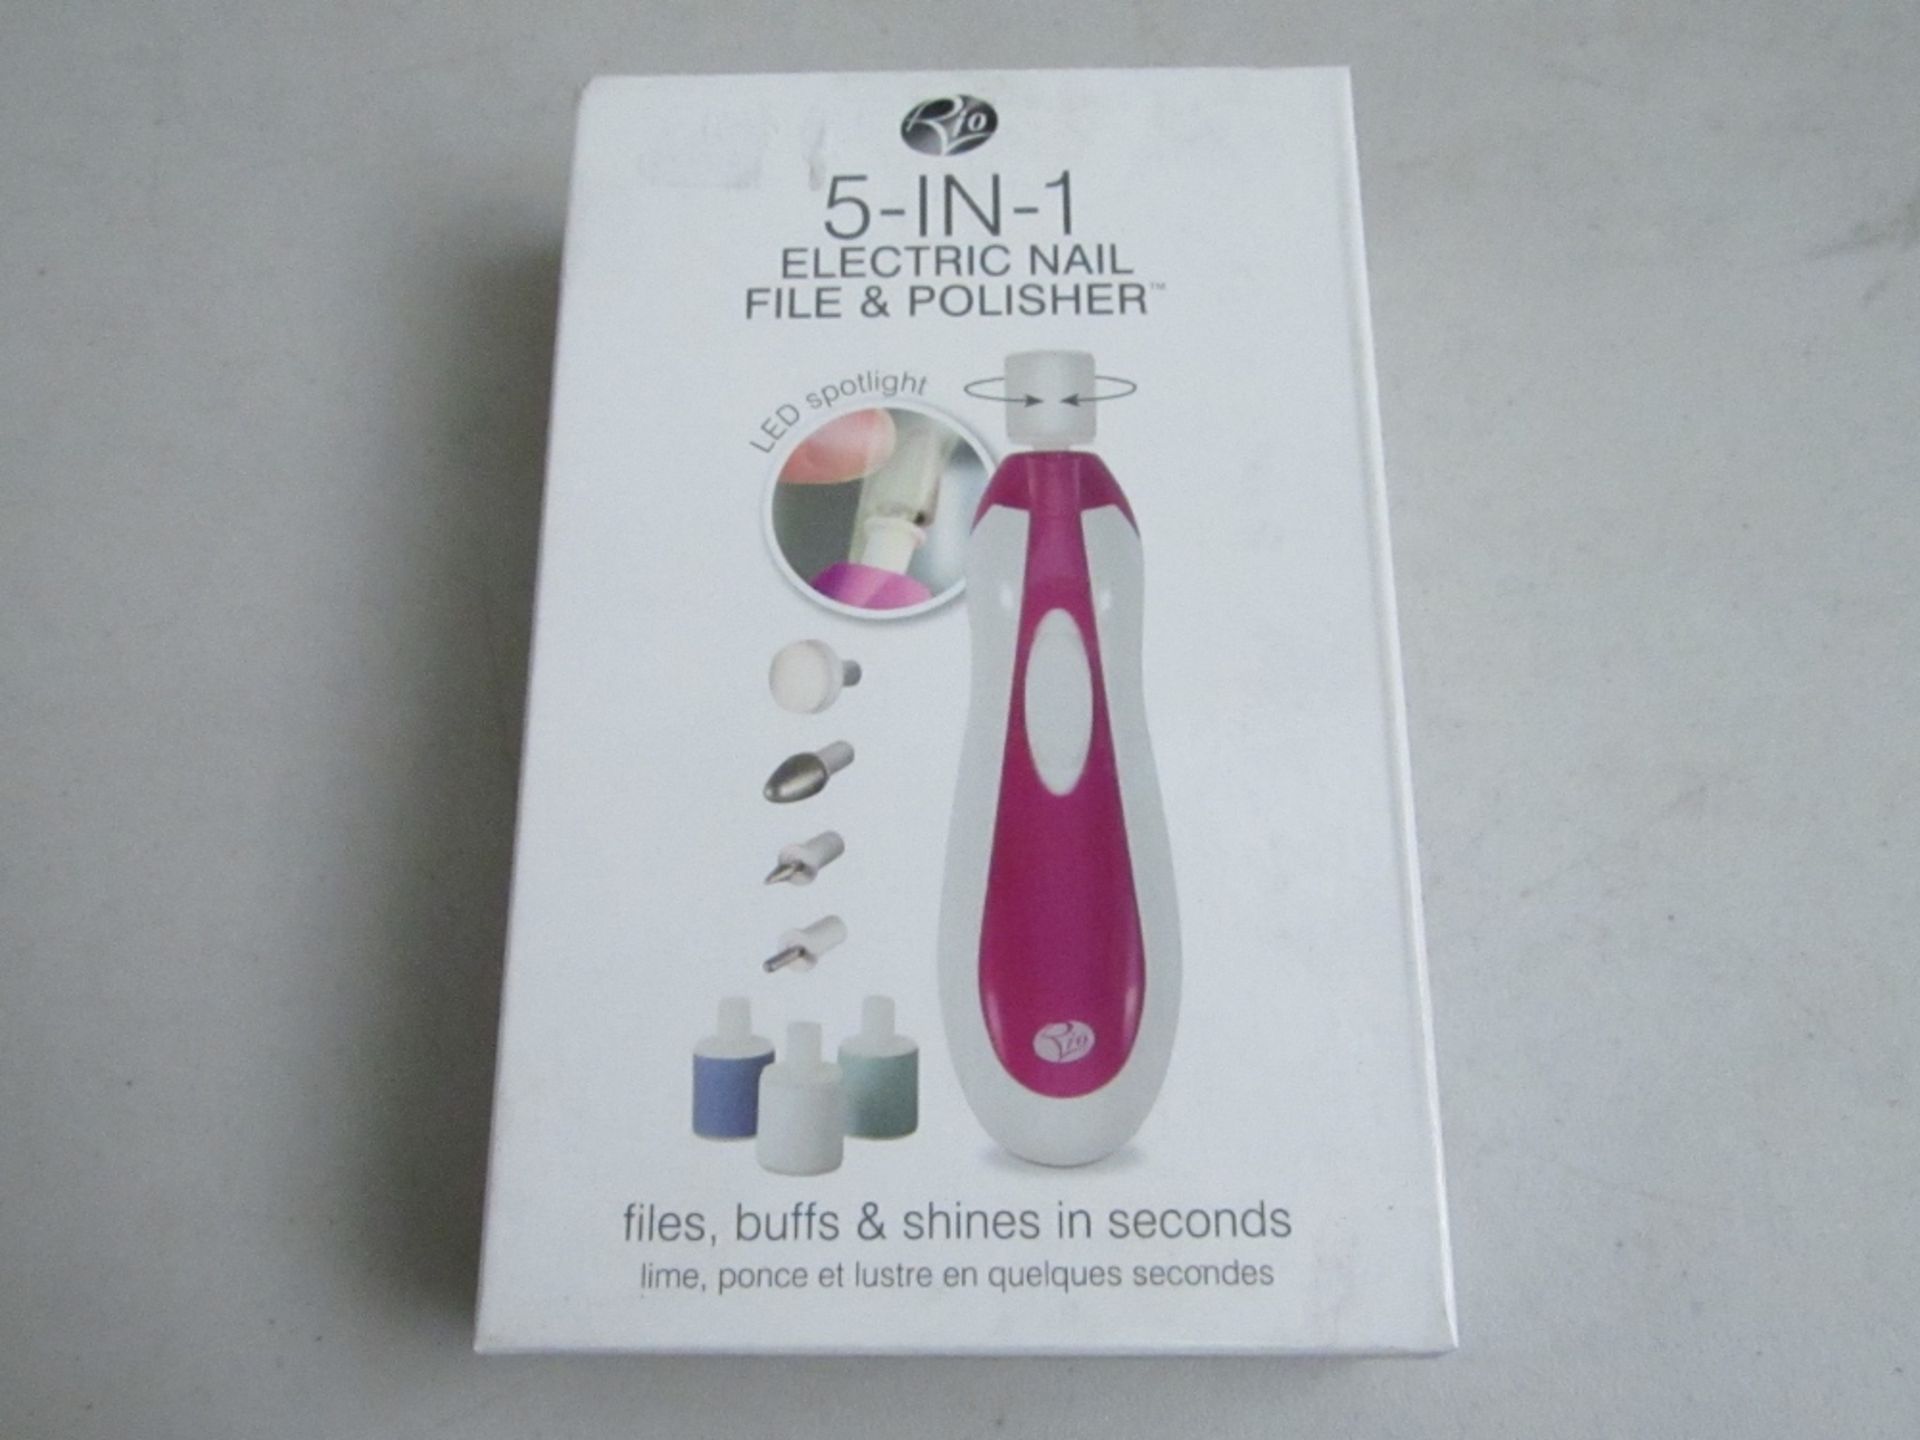 Rio 5-in-1 electric nail file & polisher. New & boxed.